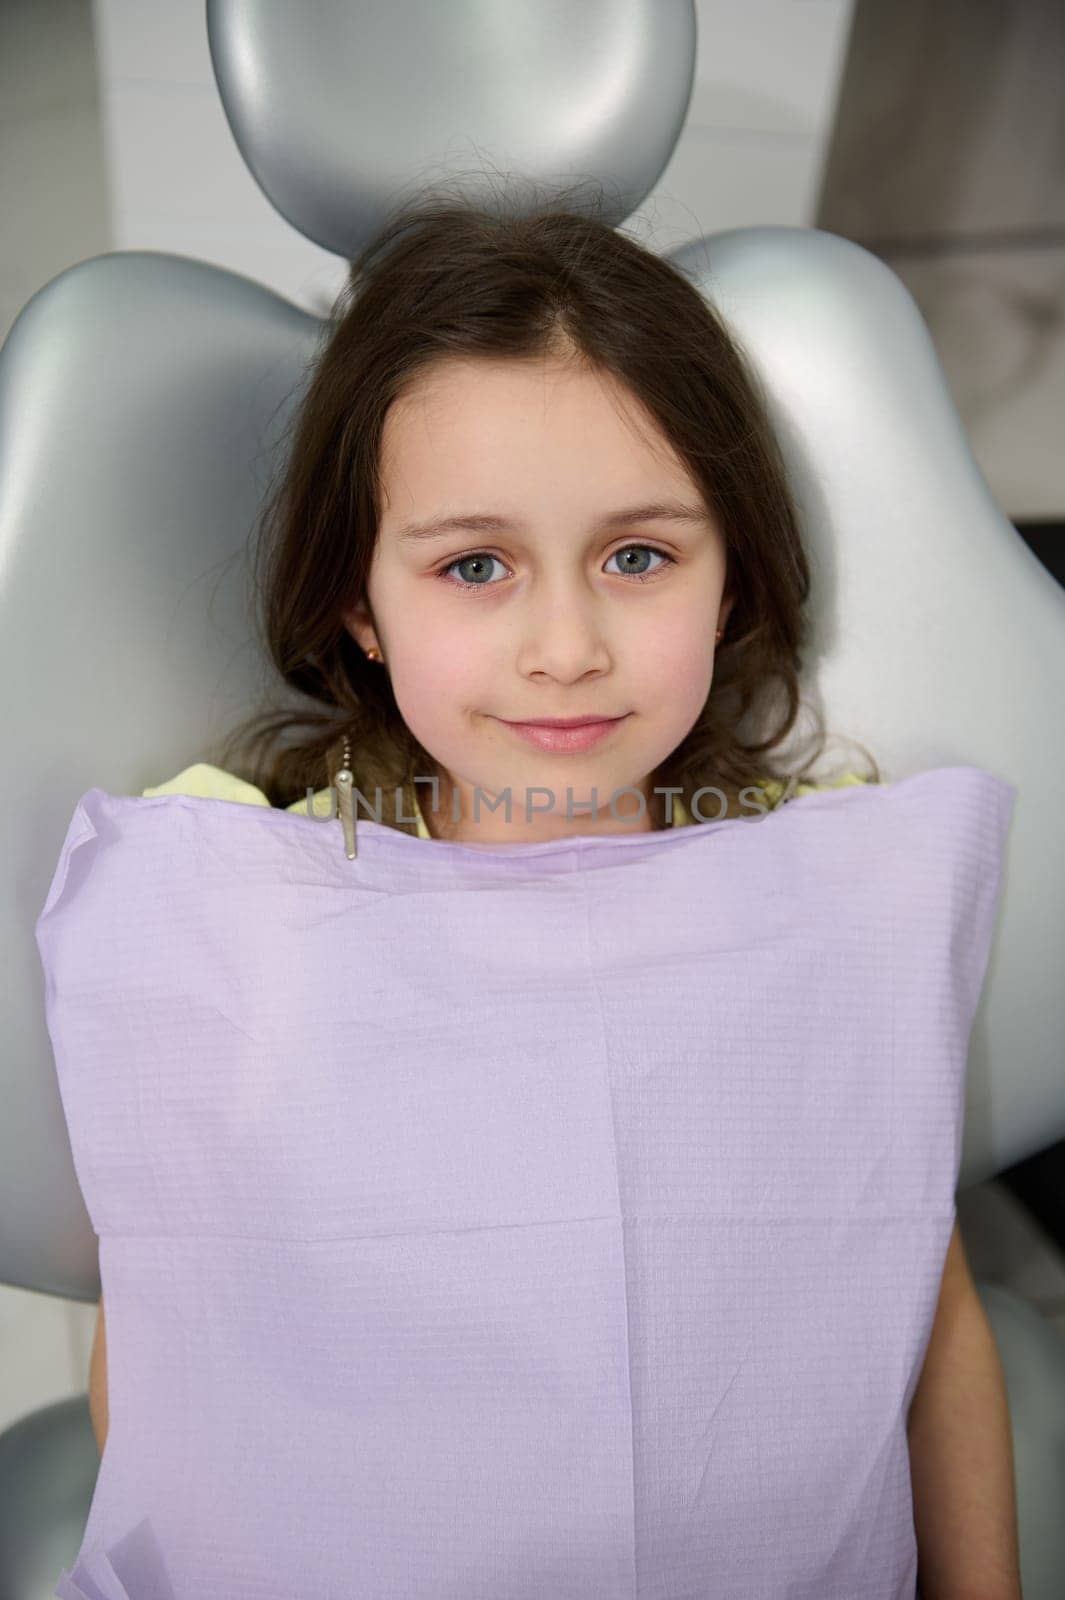 Top view. Beautiful Caucasian child, lovely little girl in dentist's chair, smiling looking at camera, ready to get a dental treatment or regular prophylactic checkup of baby teeth in dentistry clinic